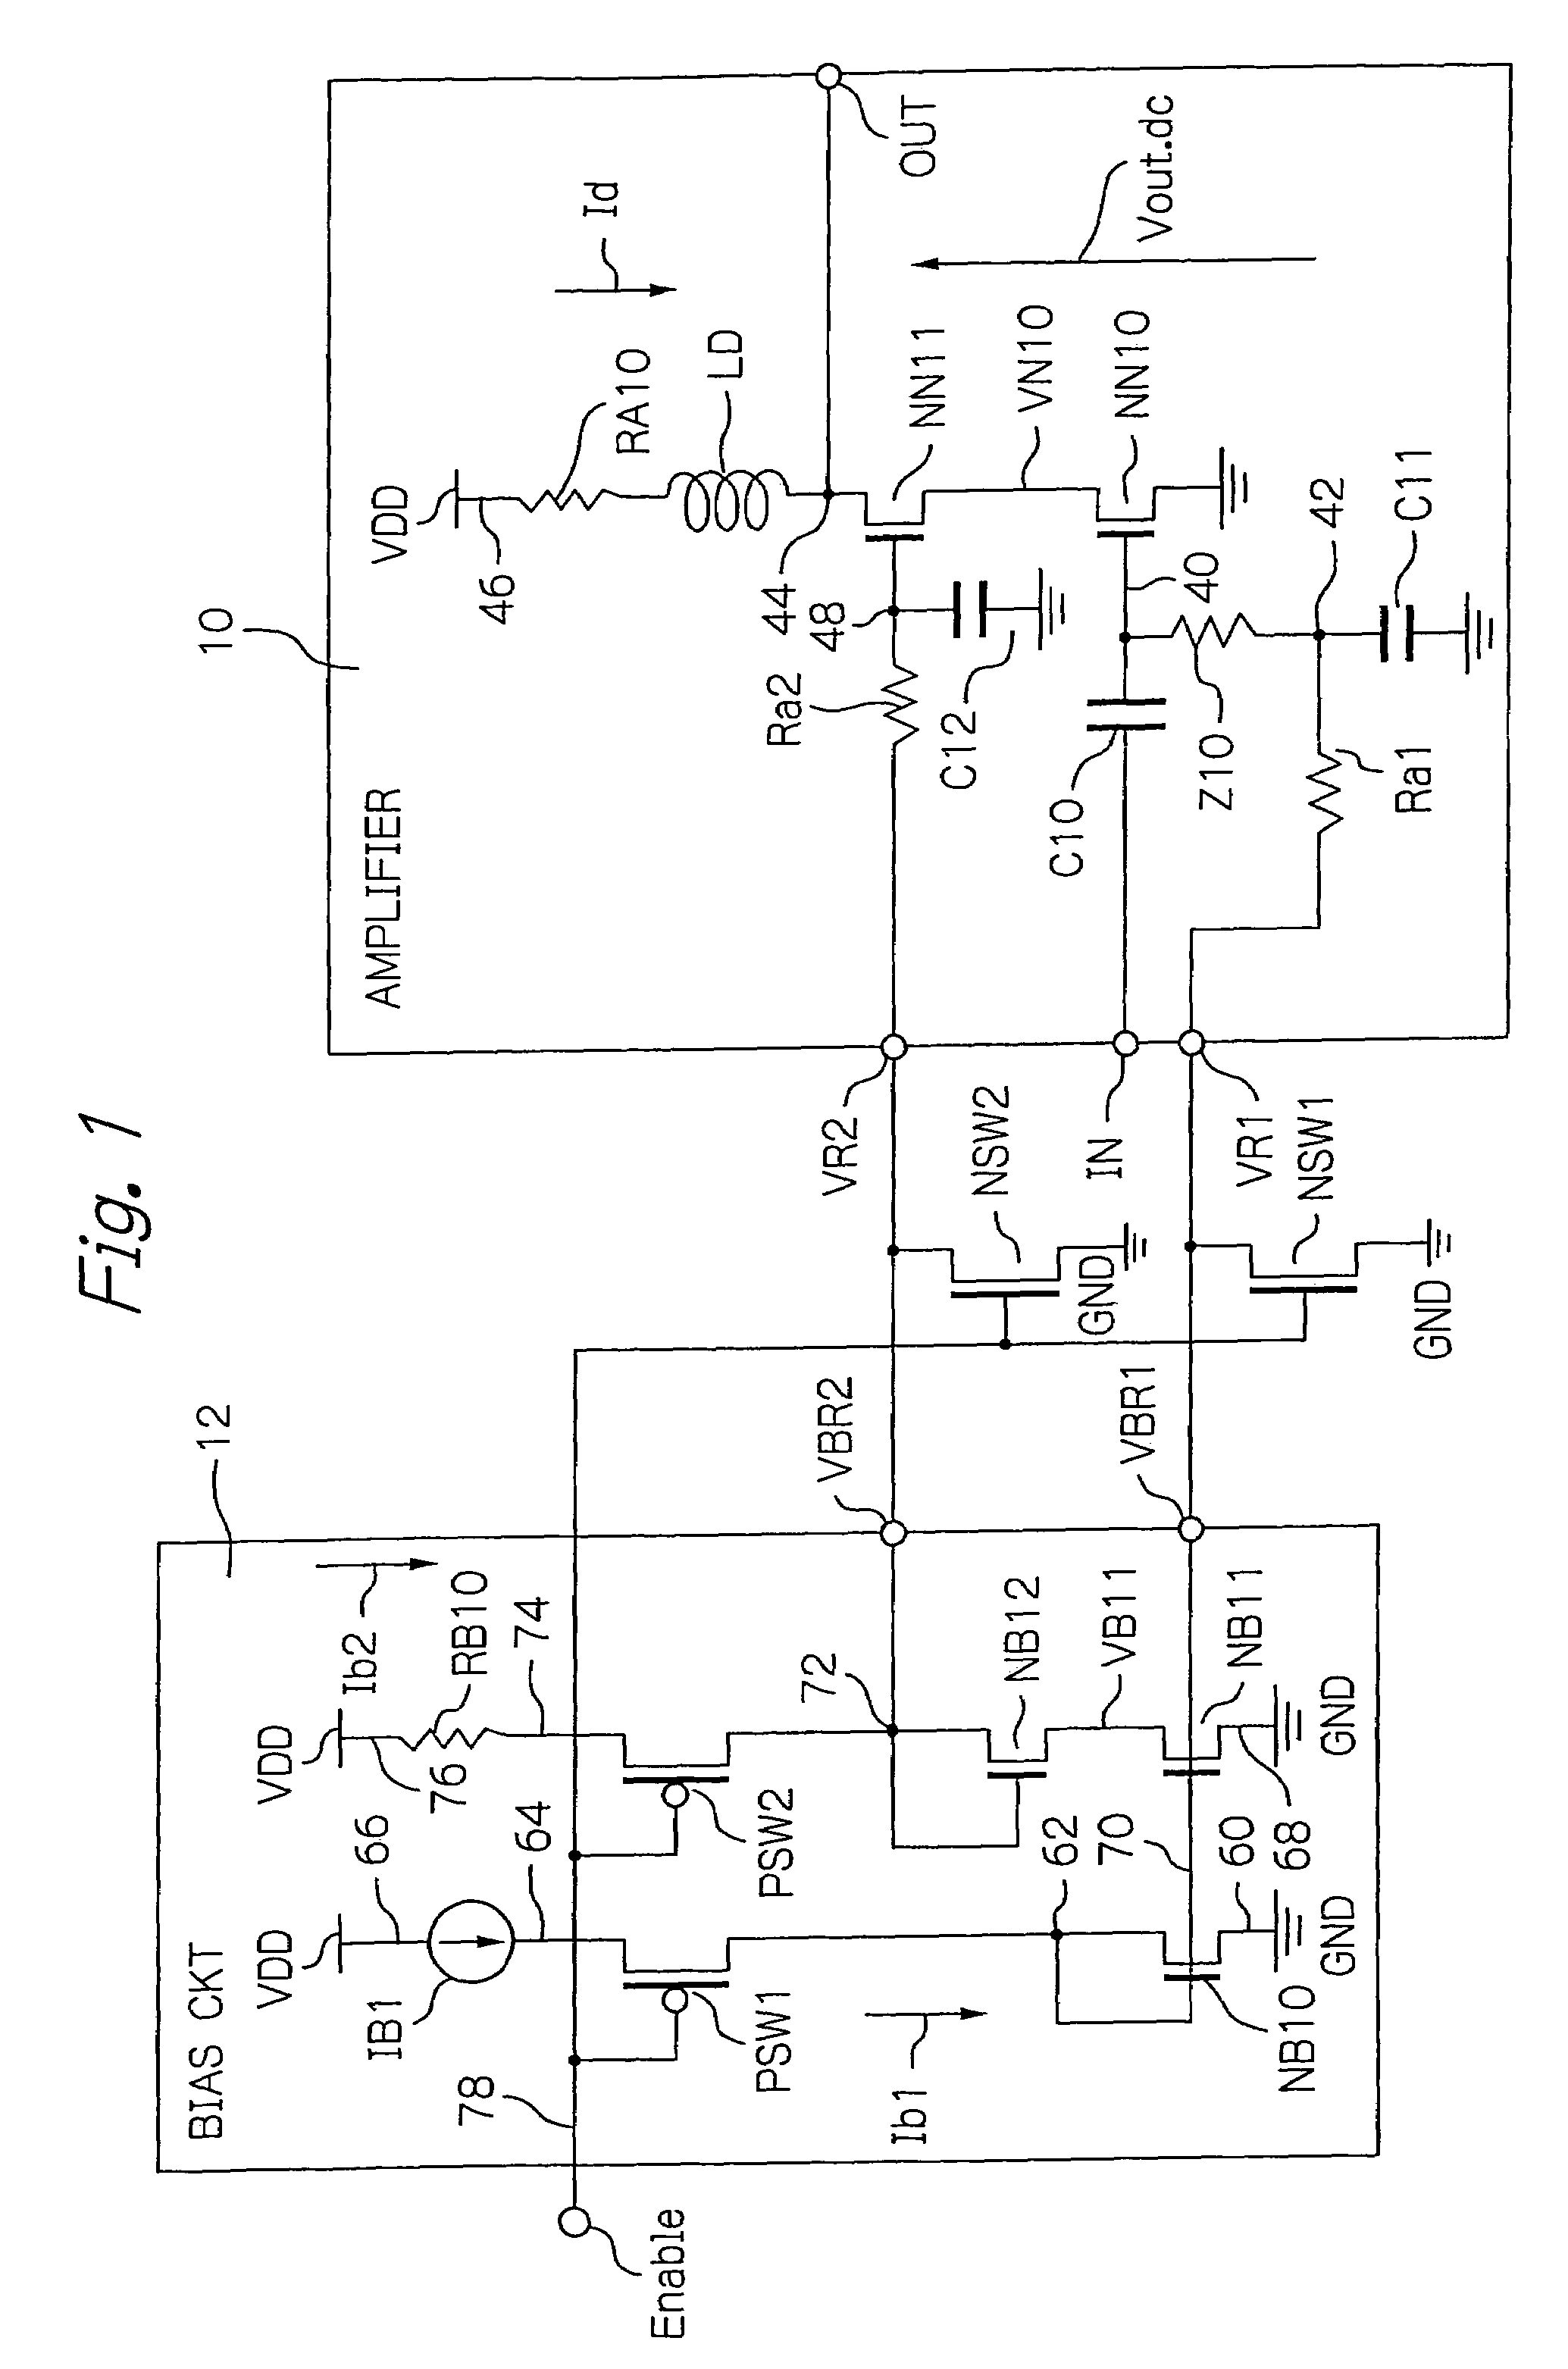 Bias circuit for a wideband amplifier driven with low voltage